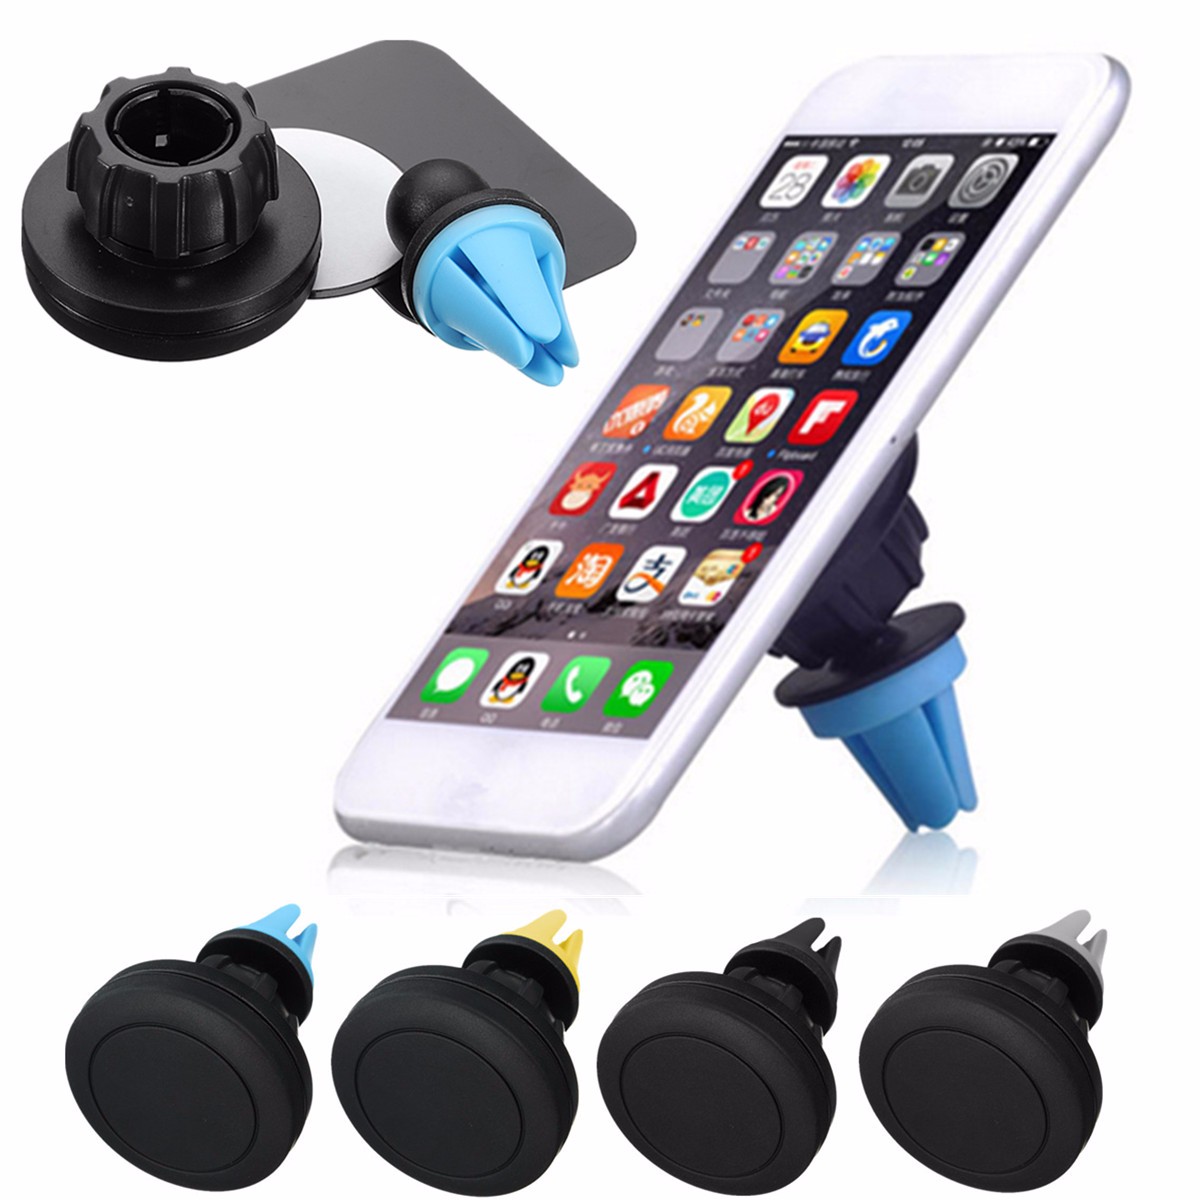 

Universal Magnetic Car Air Vent Holder Phone Stand Mount for iPhone Samsung Xiaomi GPS